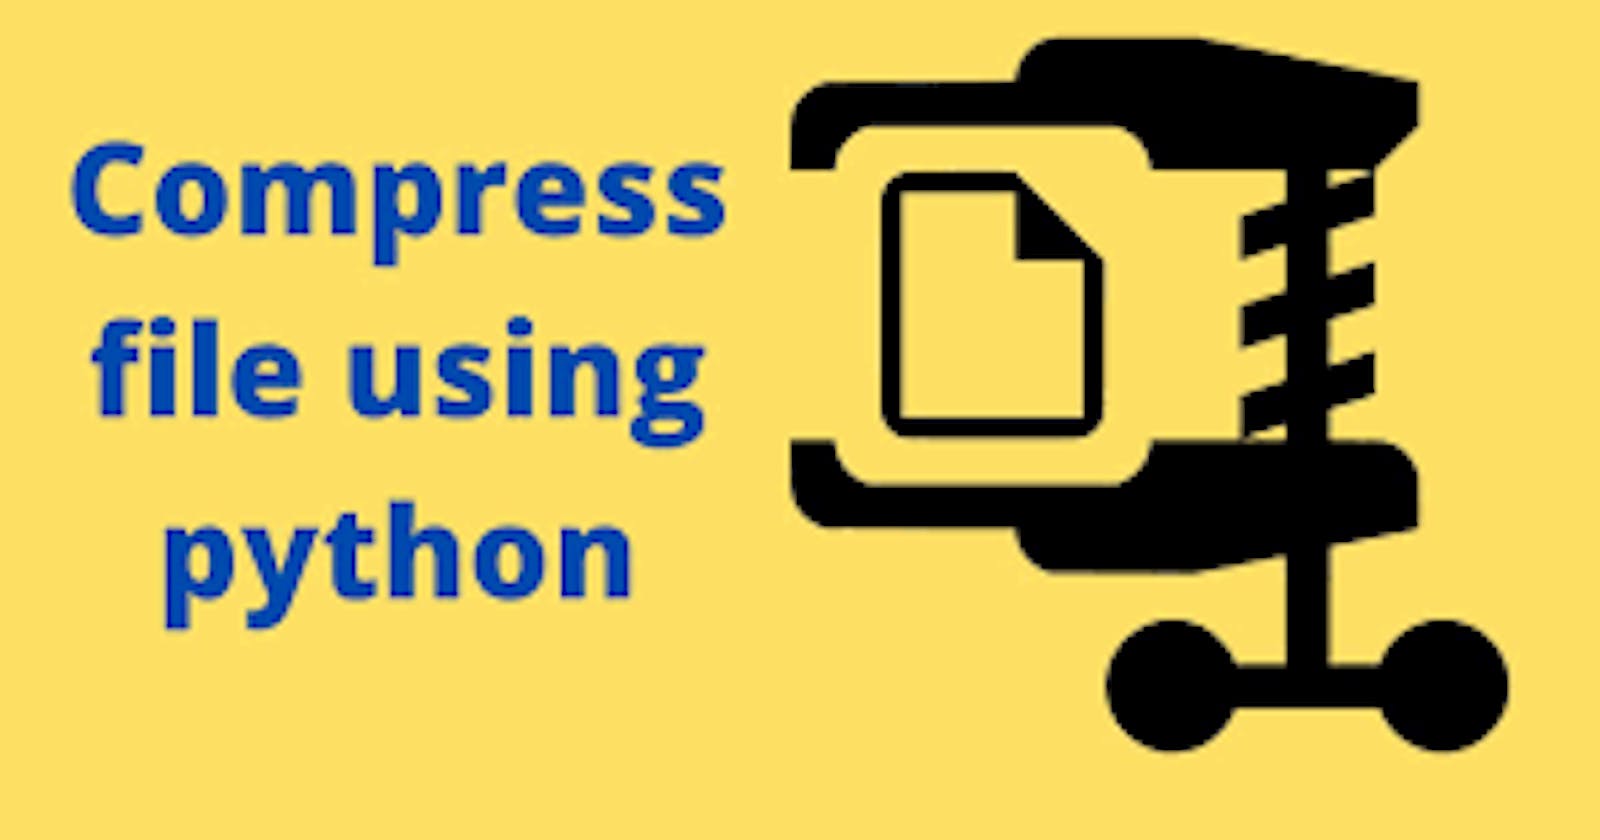 Compress files into a tar file with Python